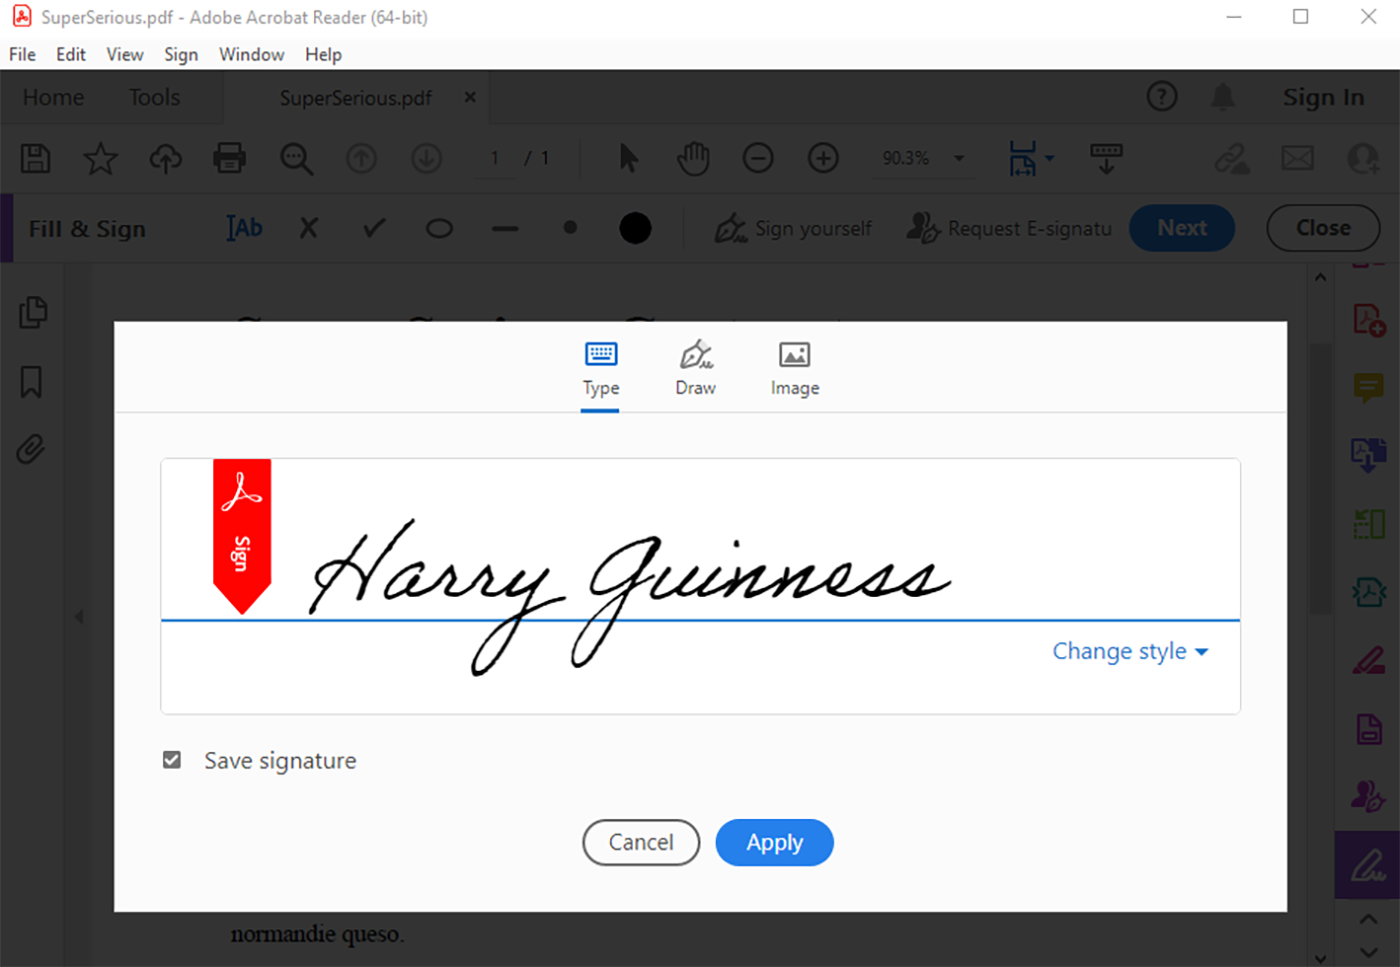 Adobe Acrobat, our pick for the best electronic signature app for occasionally signing documents on a PC